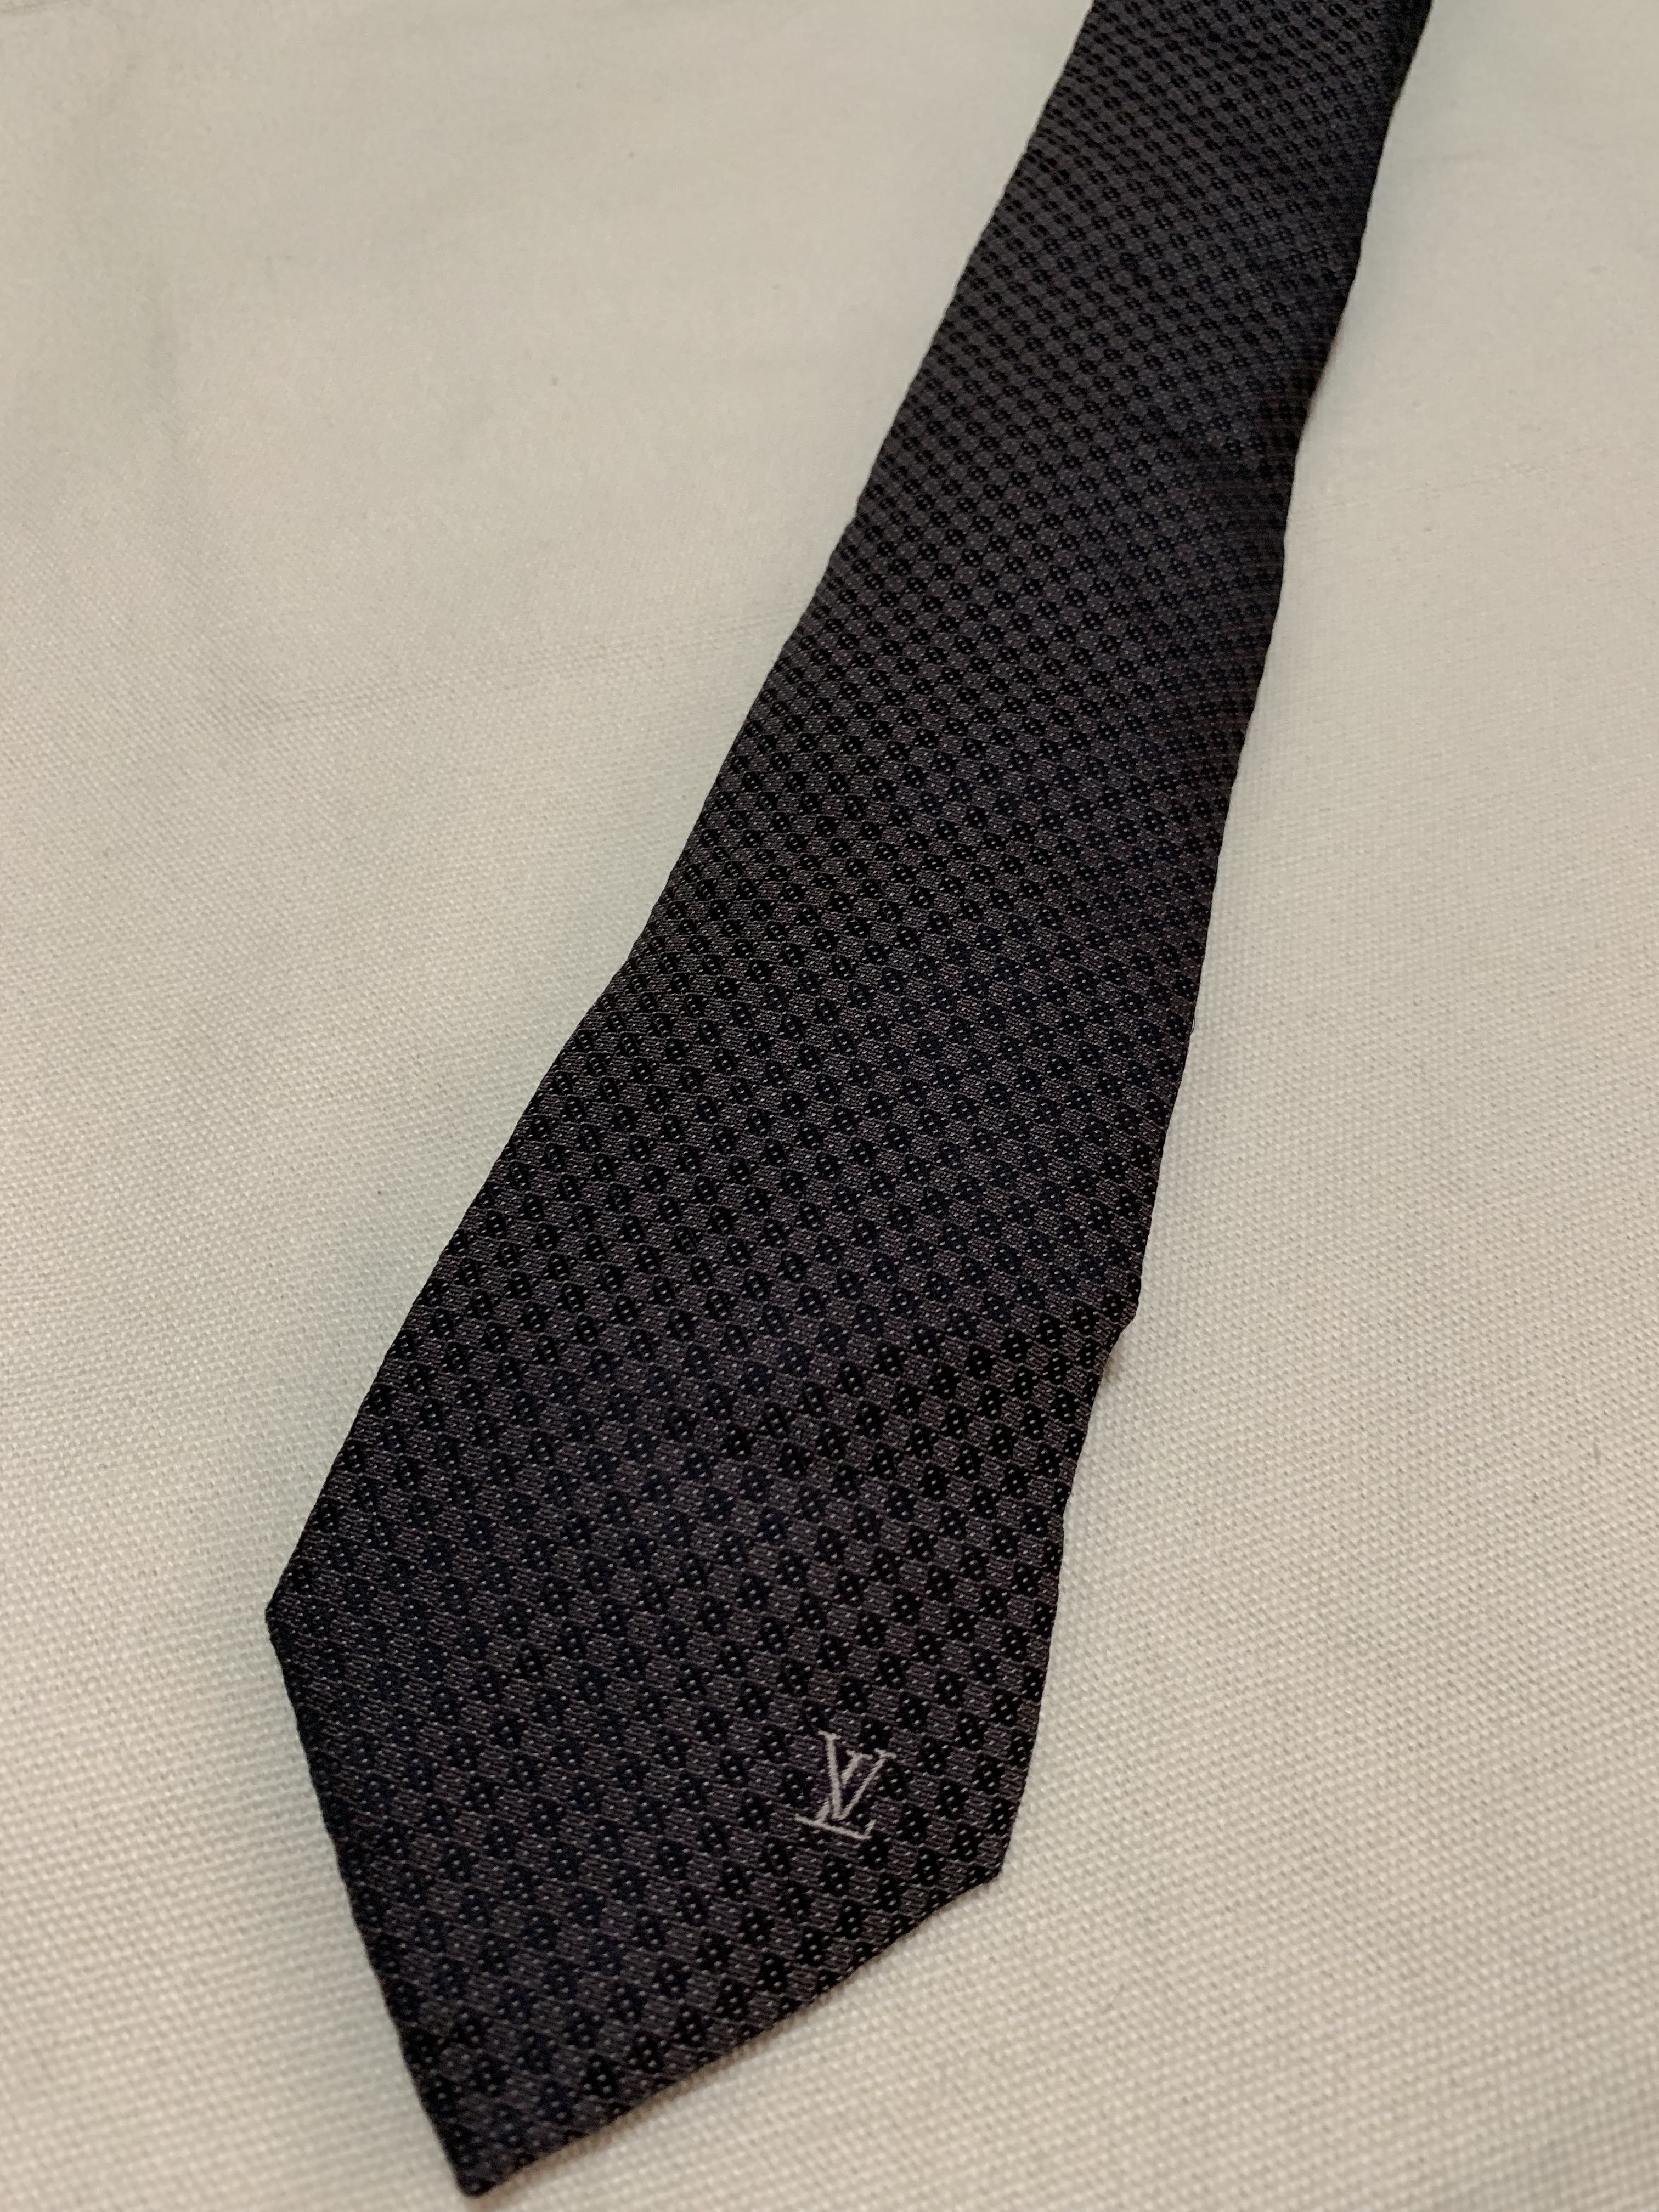 Louis Vuitton Tie, Men's Fashion, Watches & Accessories, Ties on Carousell